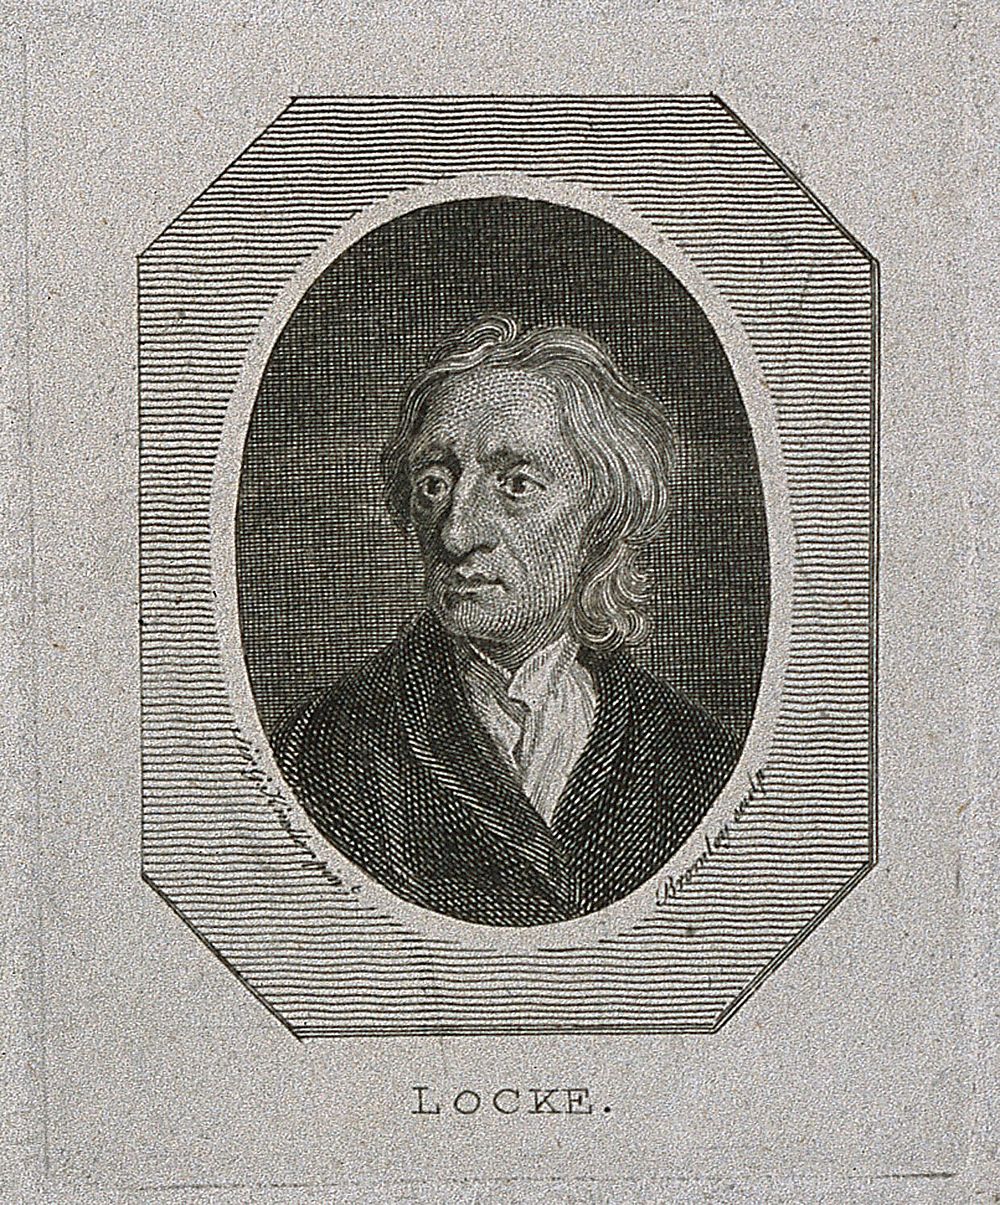 John Locke. Line engraving by W. Bromley, 1794, after Sir G. Kneller, 1697.